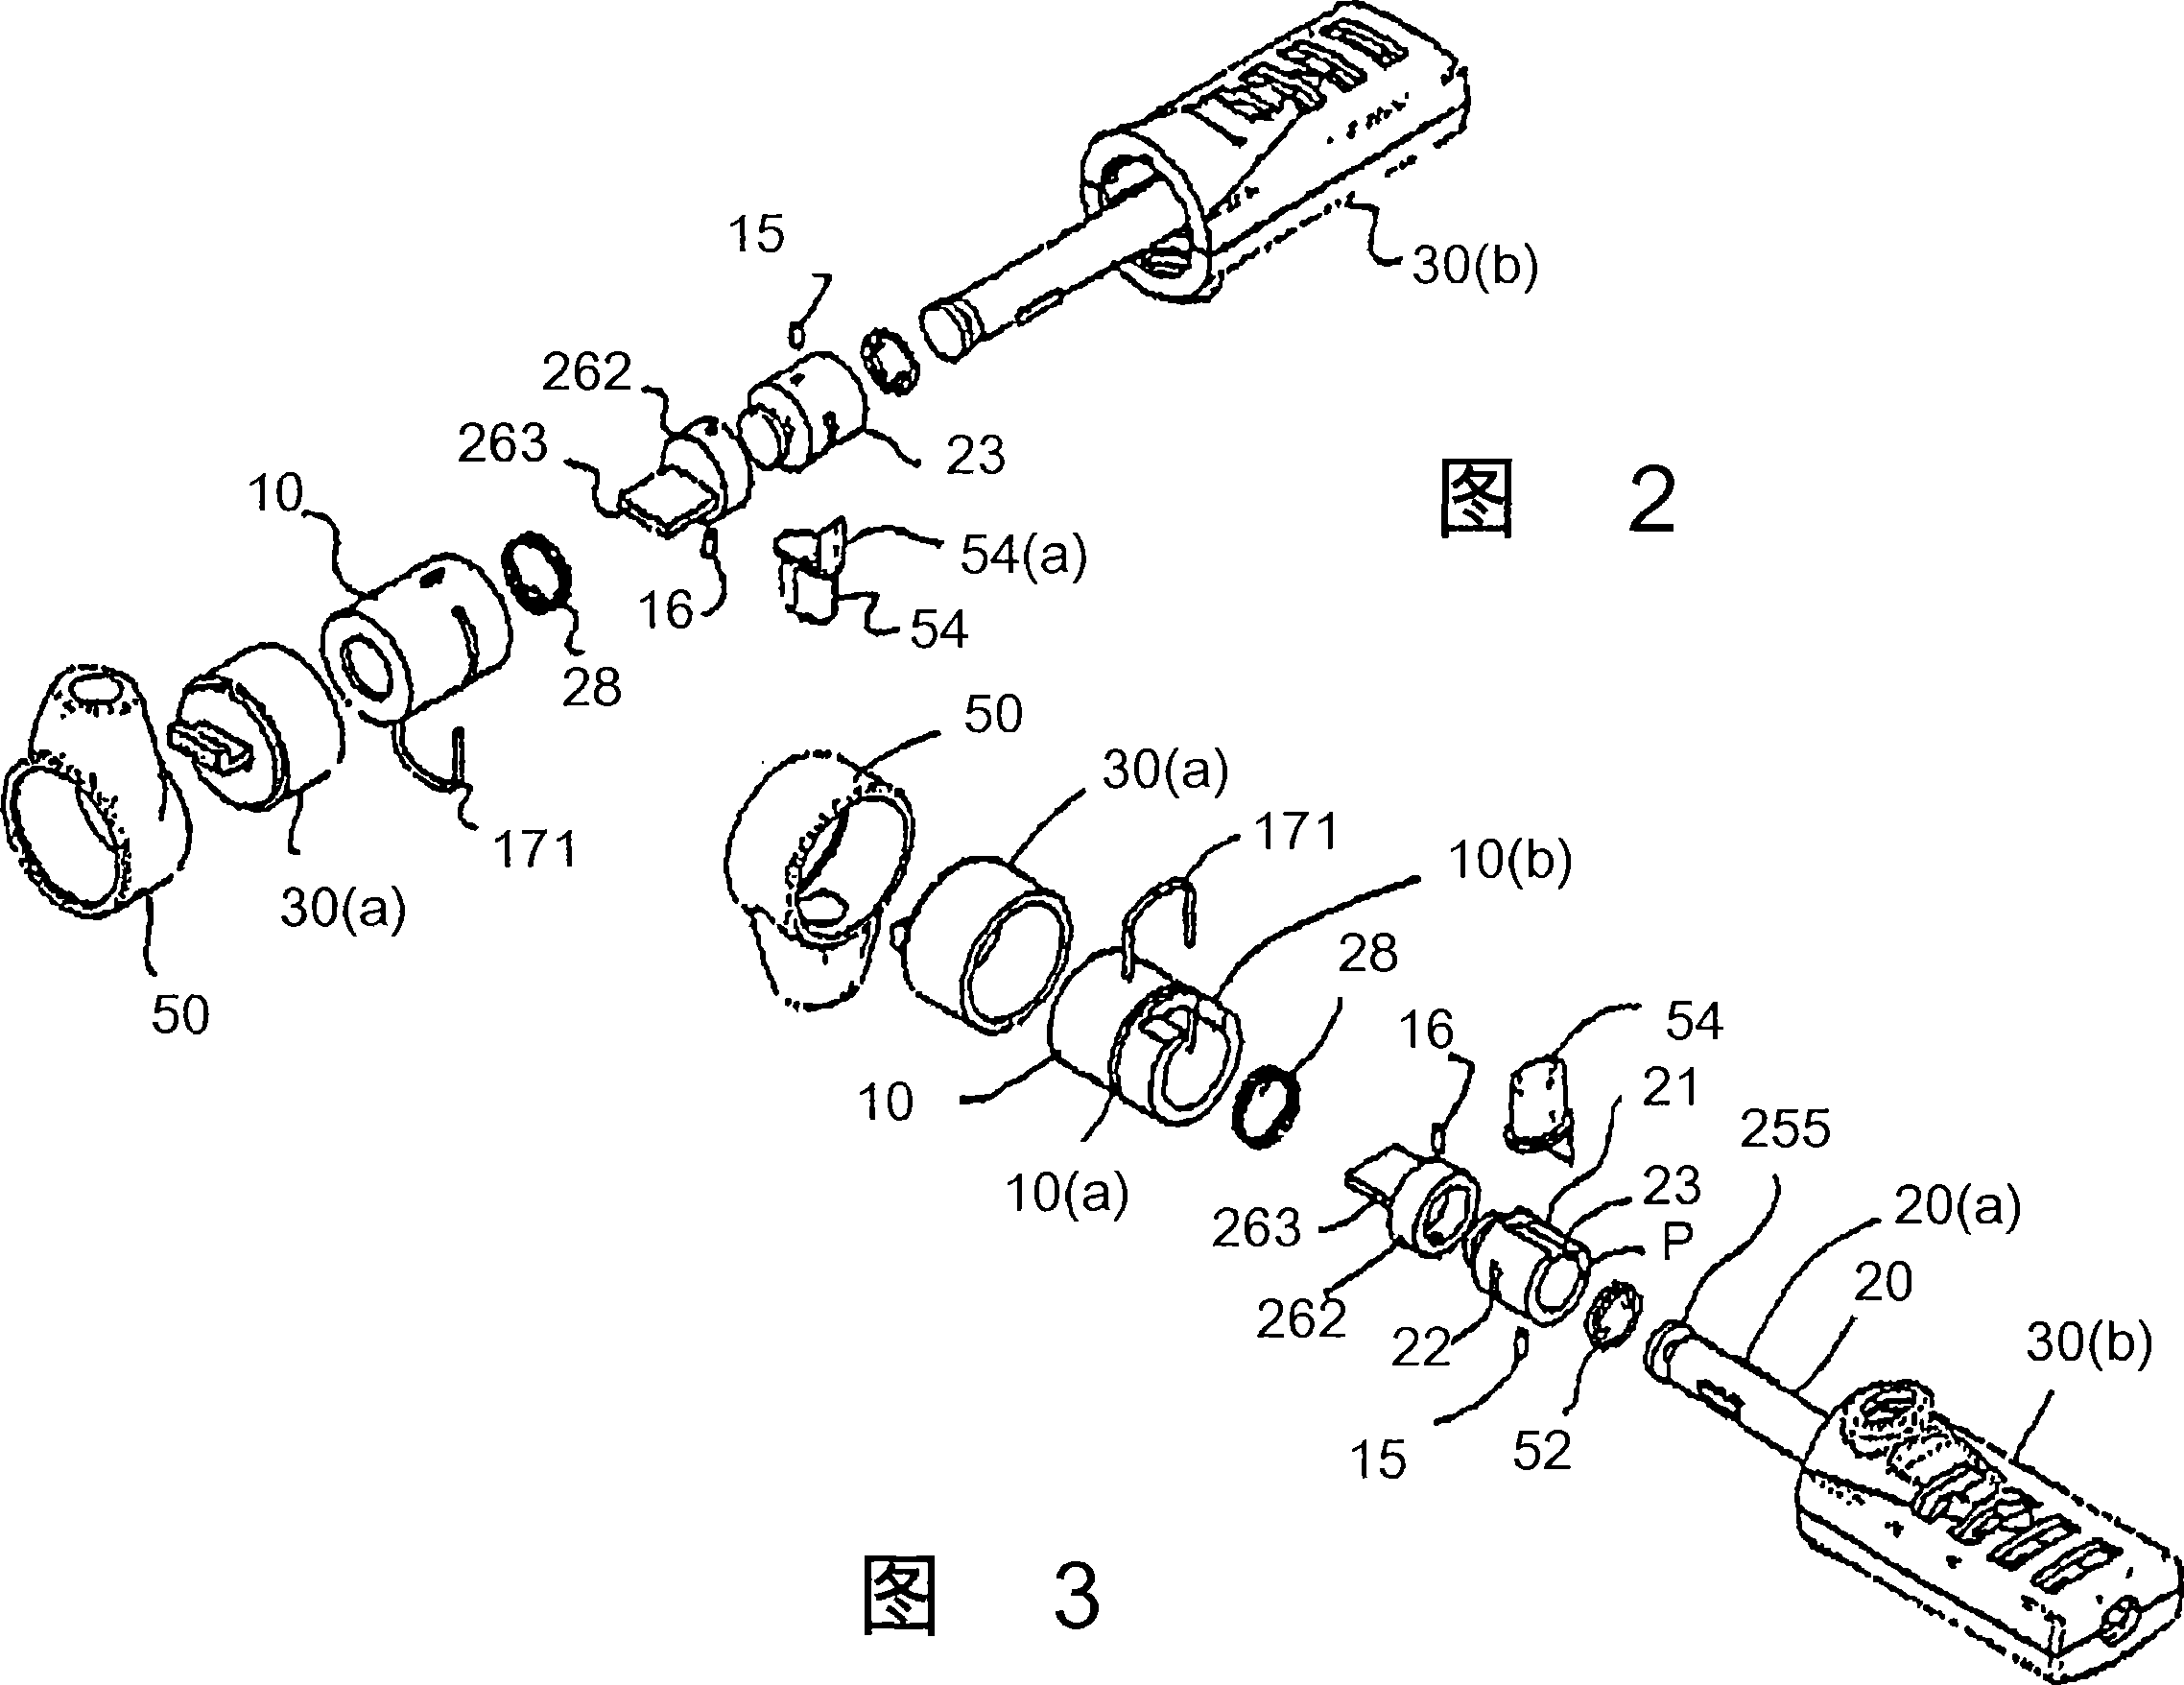 Security device including linearly moving member